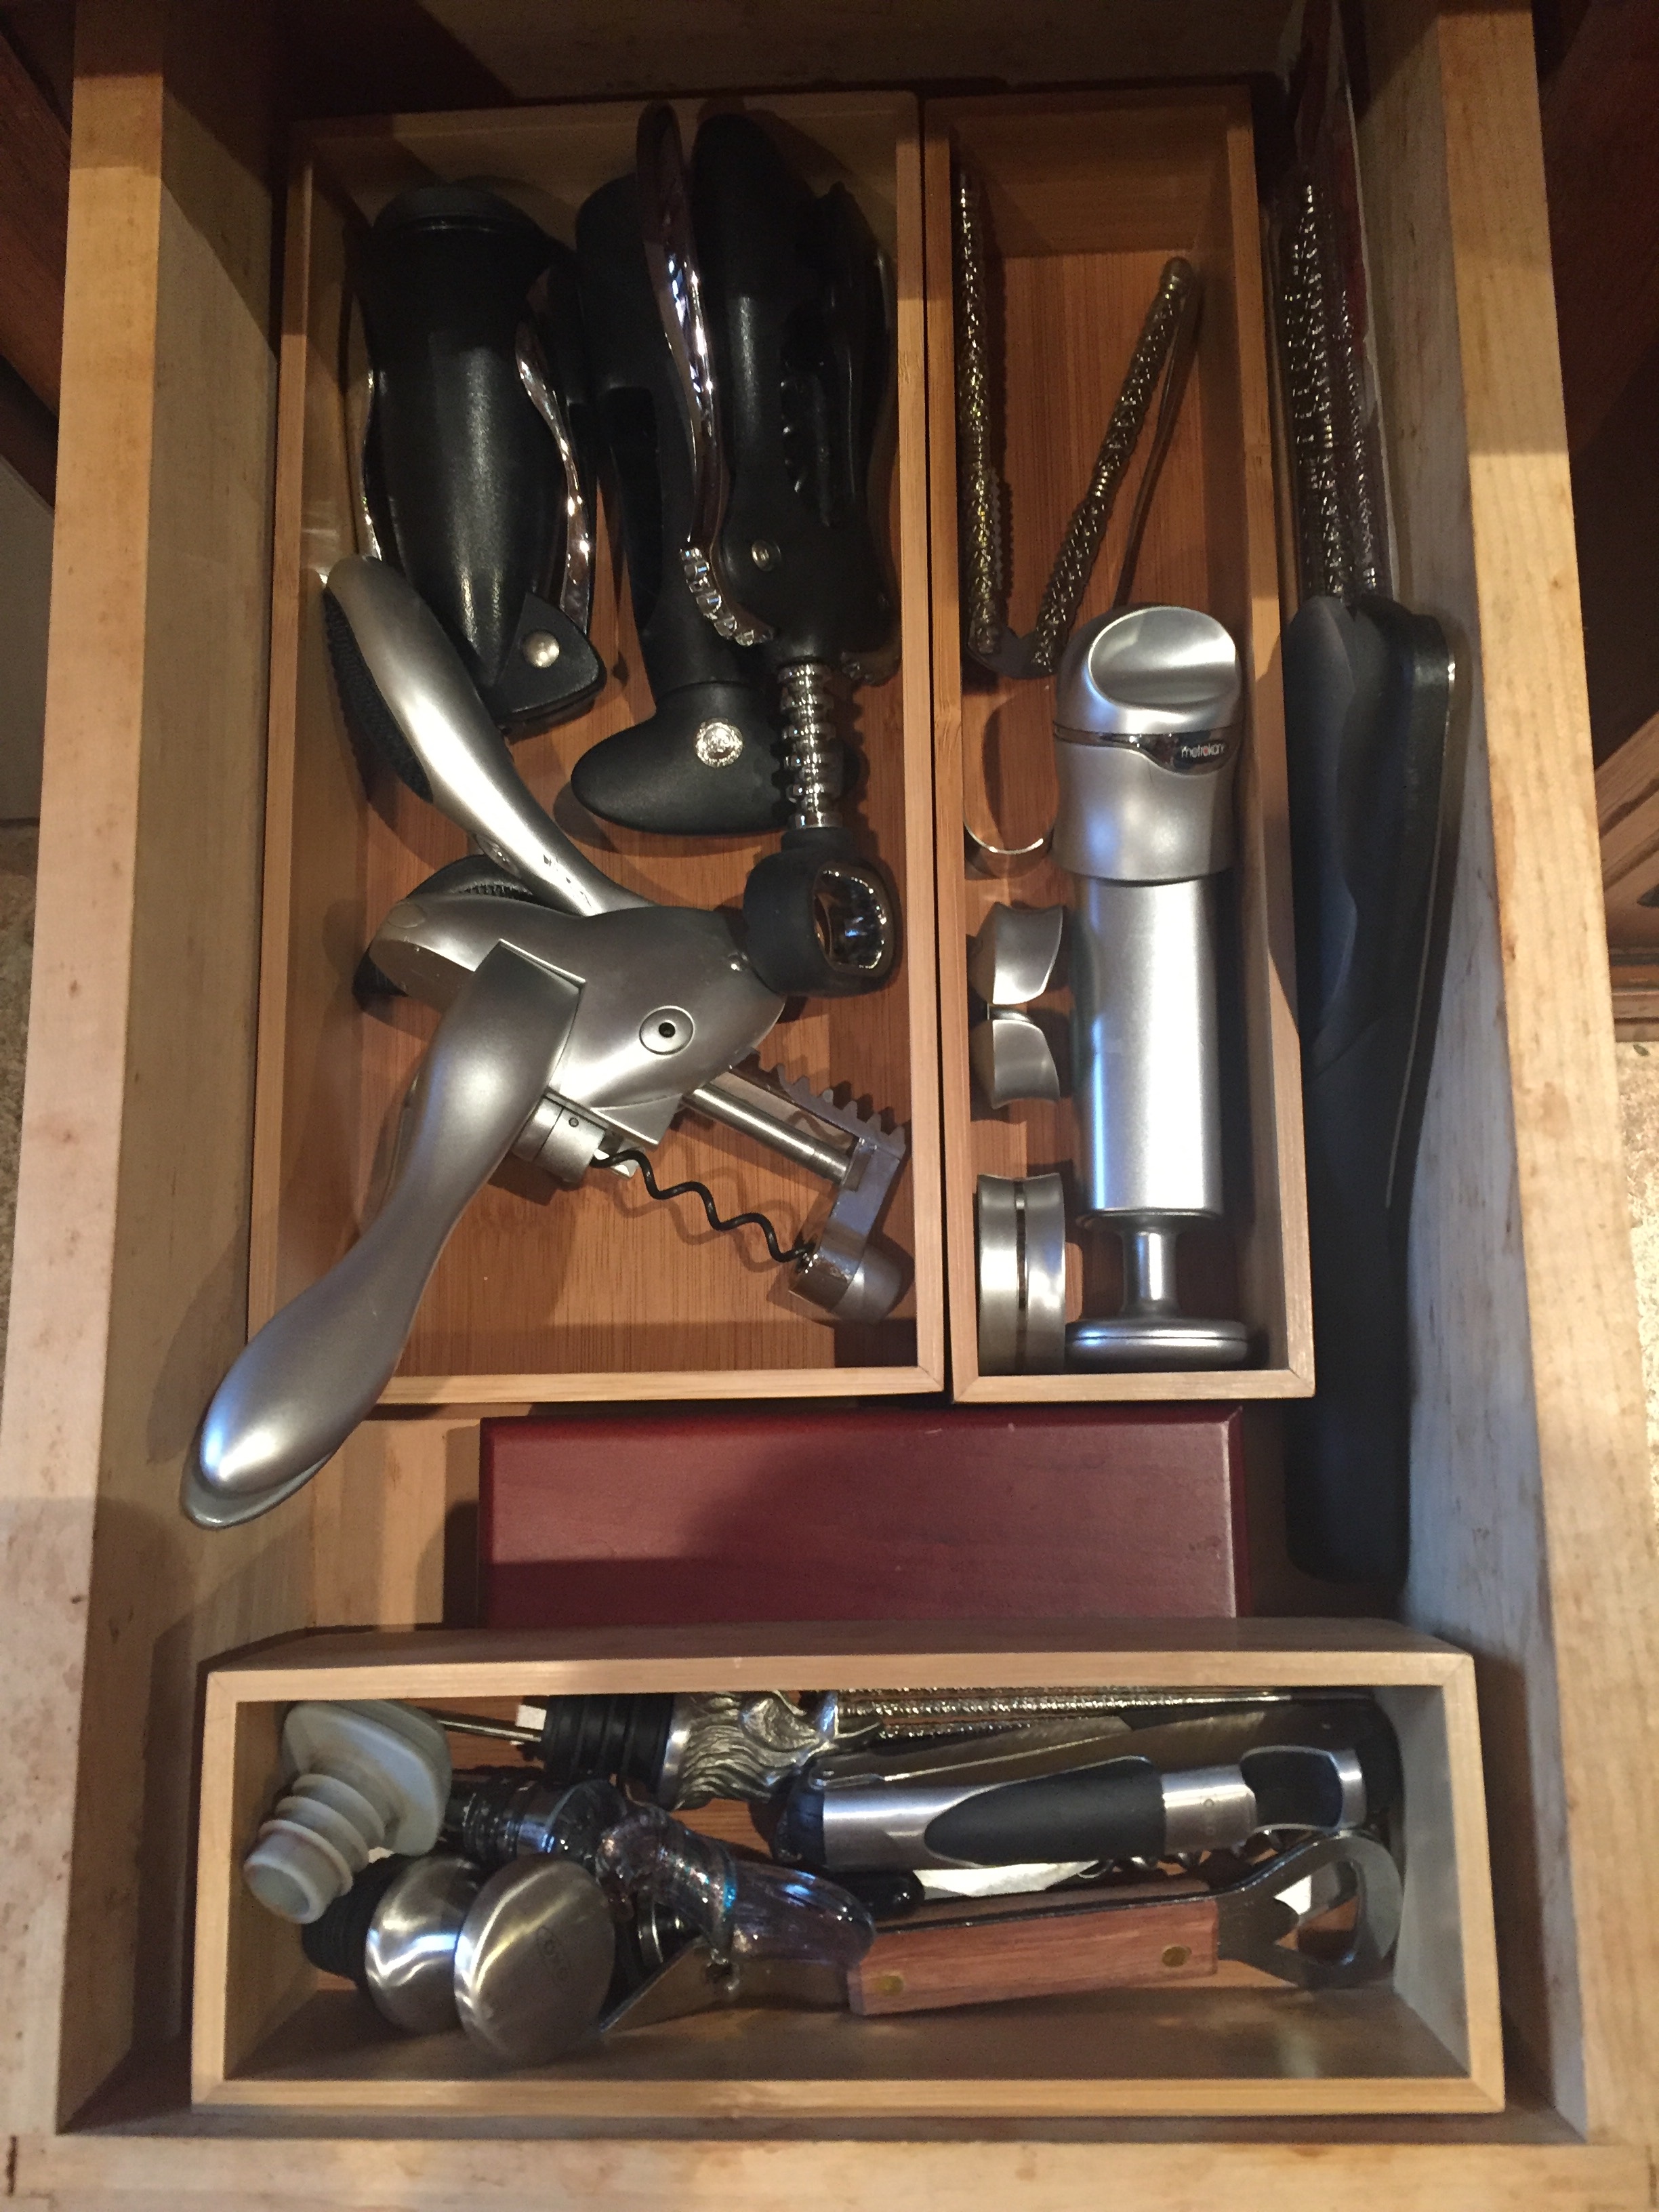 Wine Drawer - After